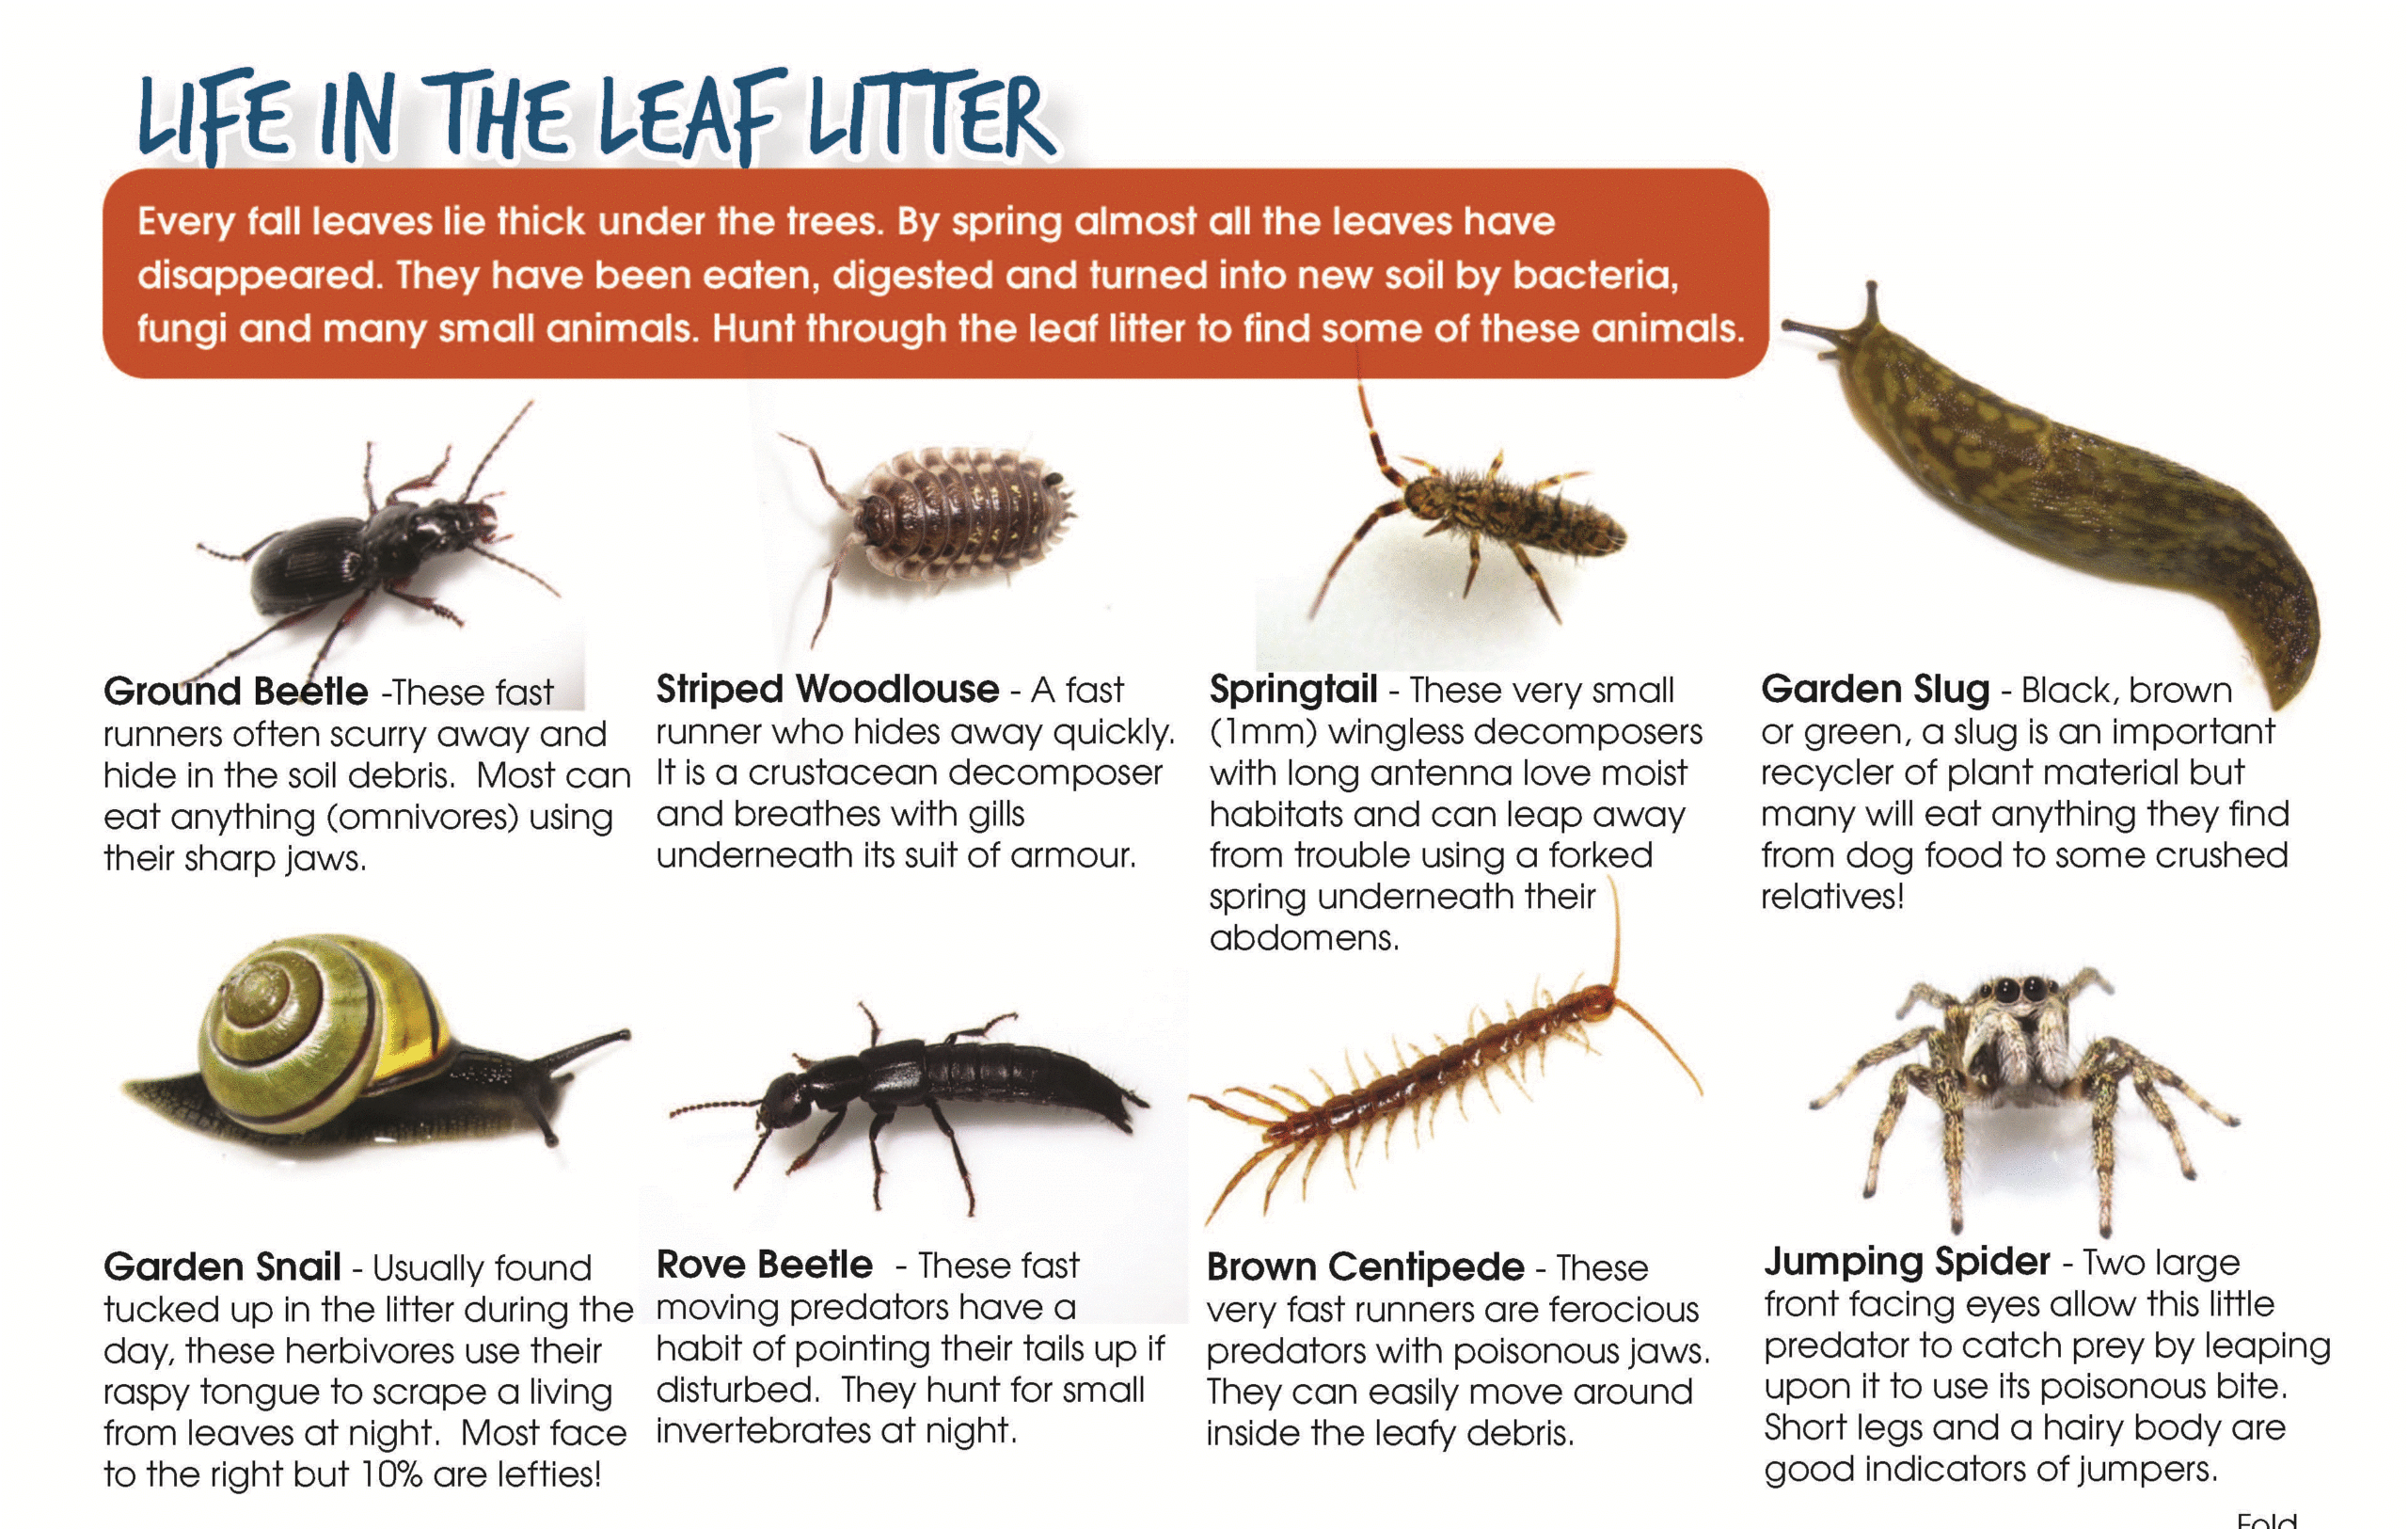 What’s lurking in the leaf litter?